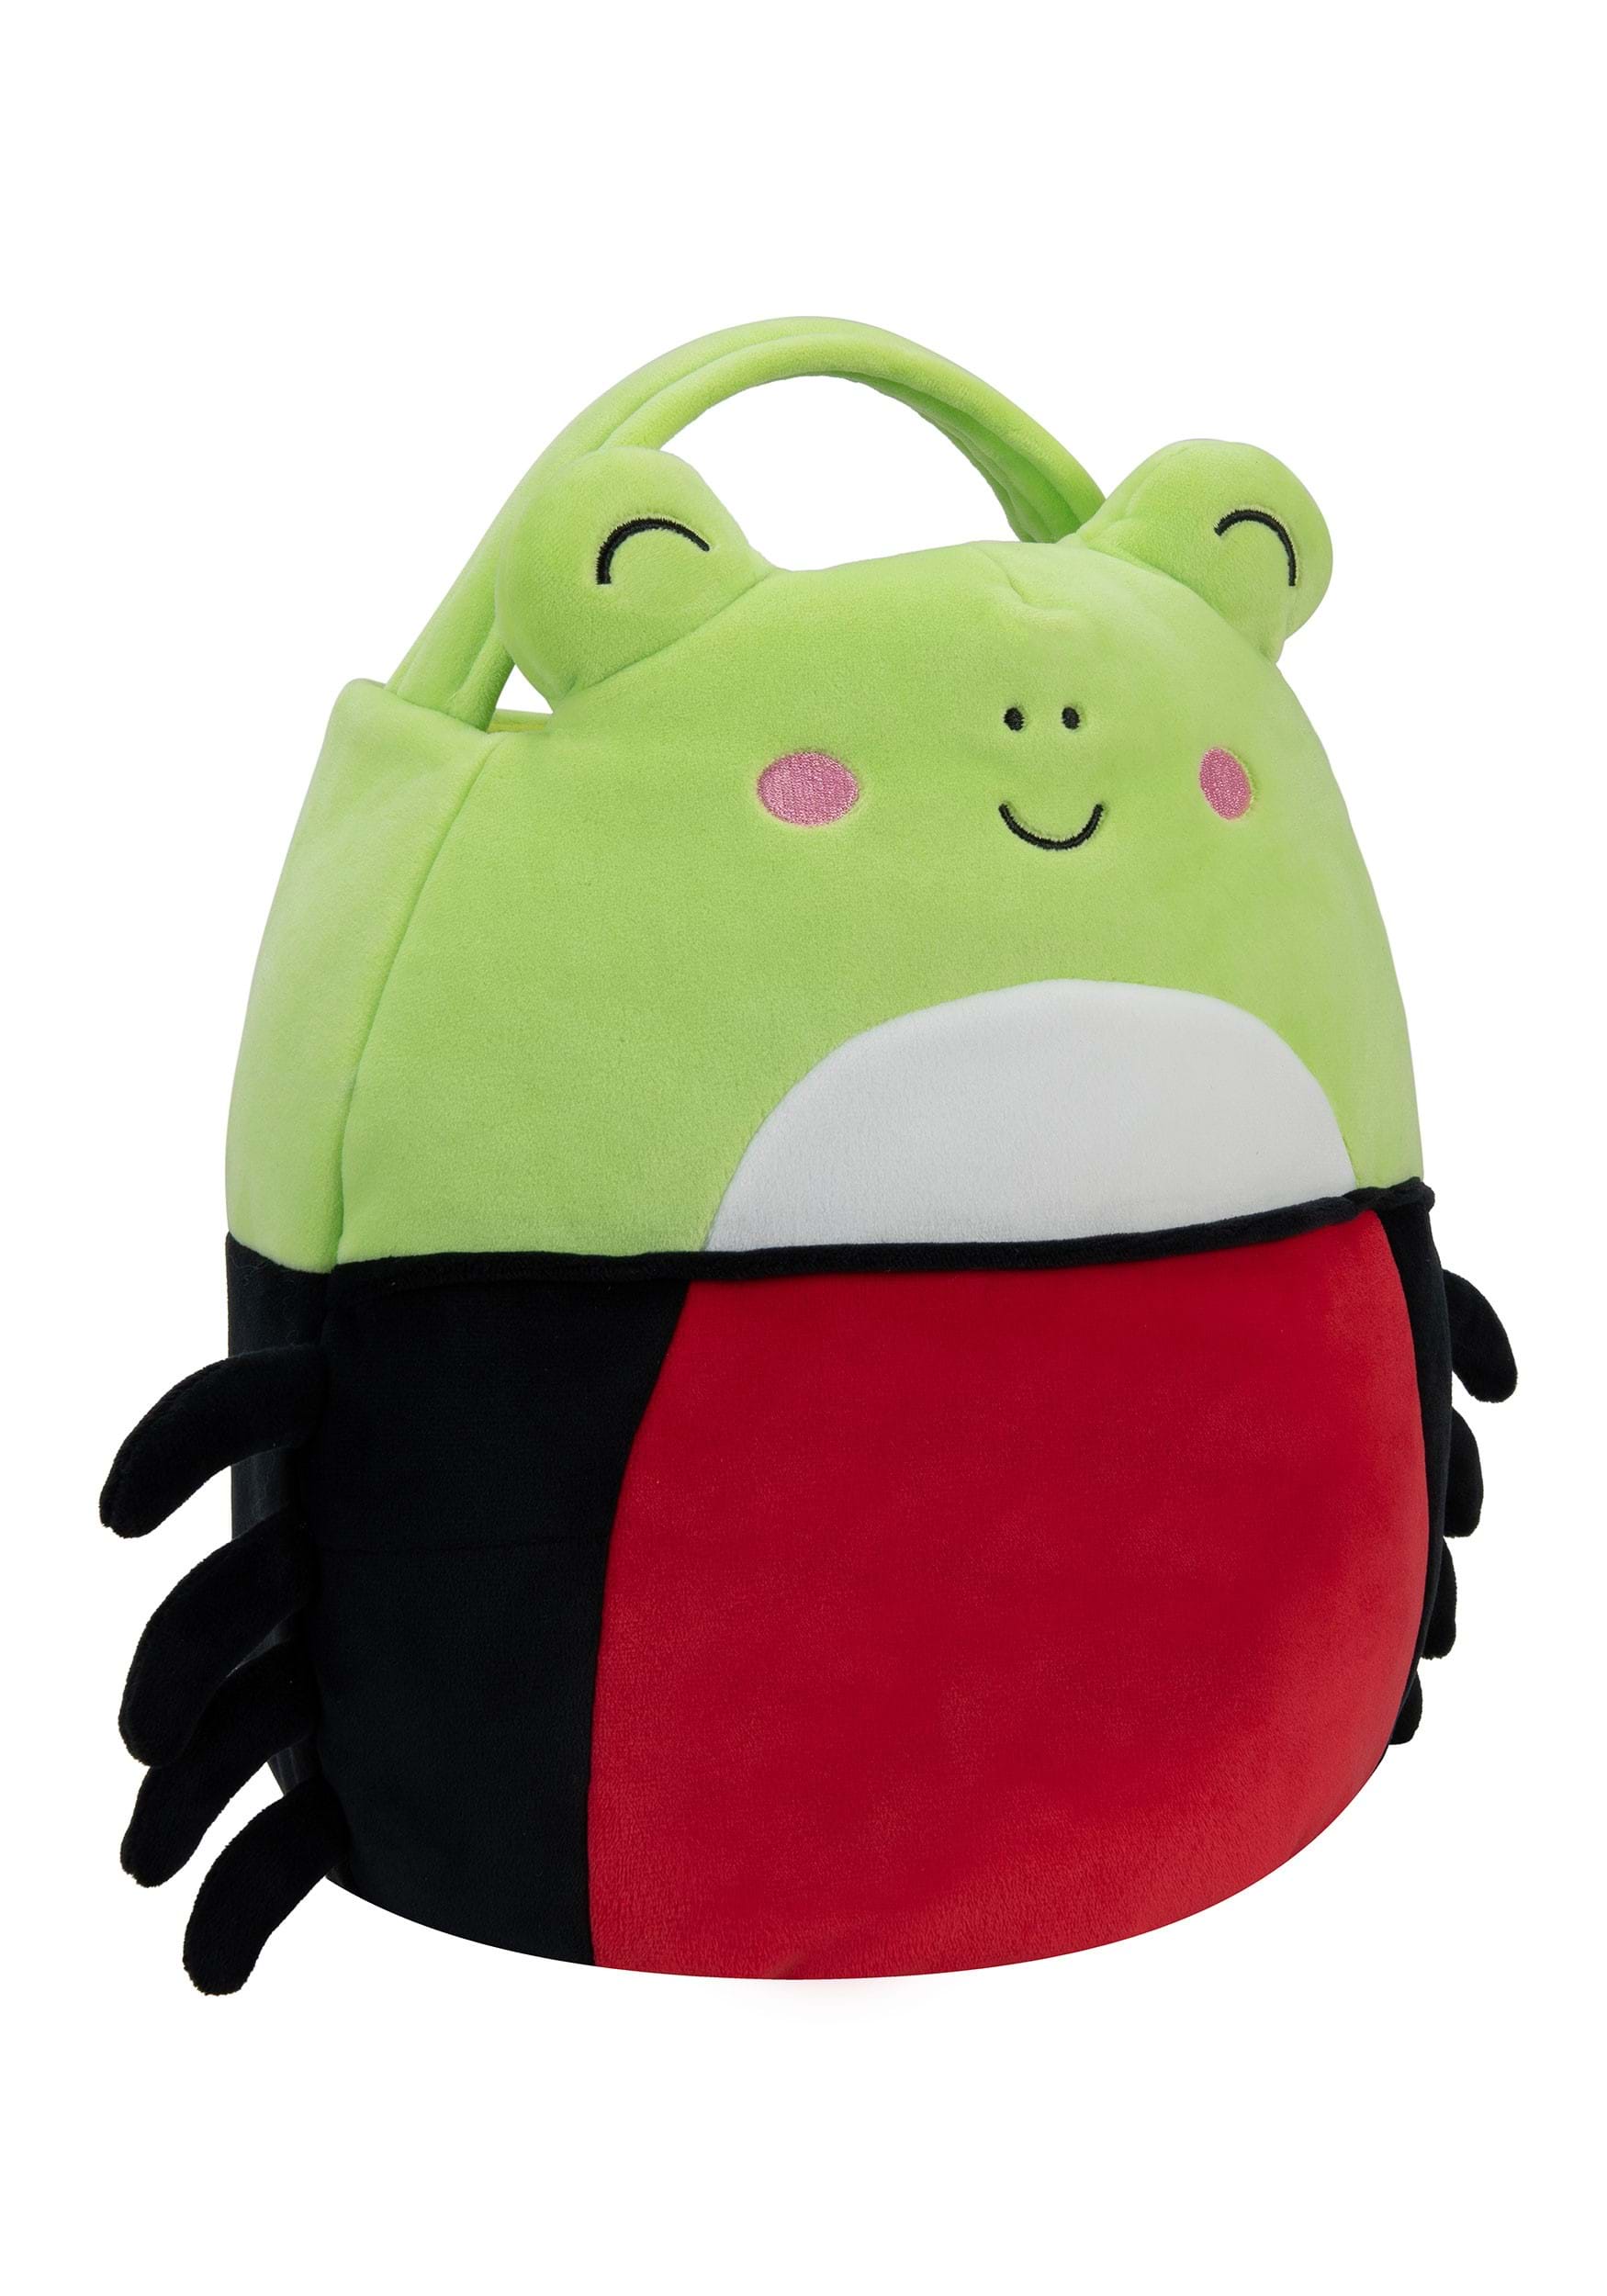 https://images.halloweencostumes.eu/products/93037/1-1/squishmallows-wendy-the-spider-frog-treat-bag.jpg